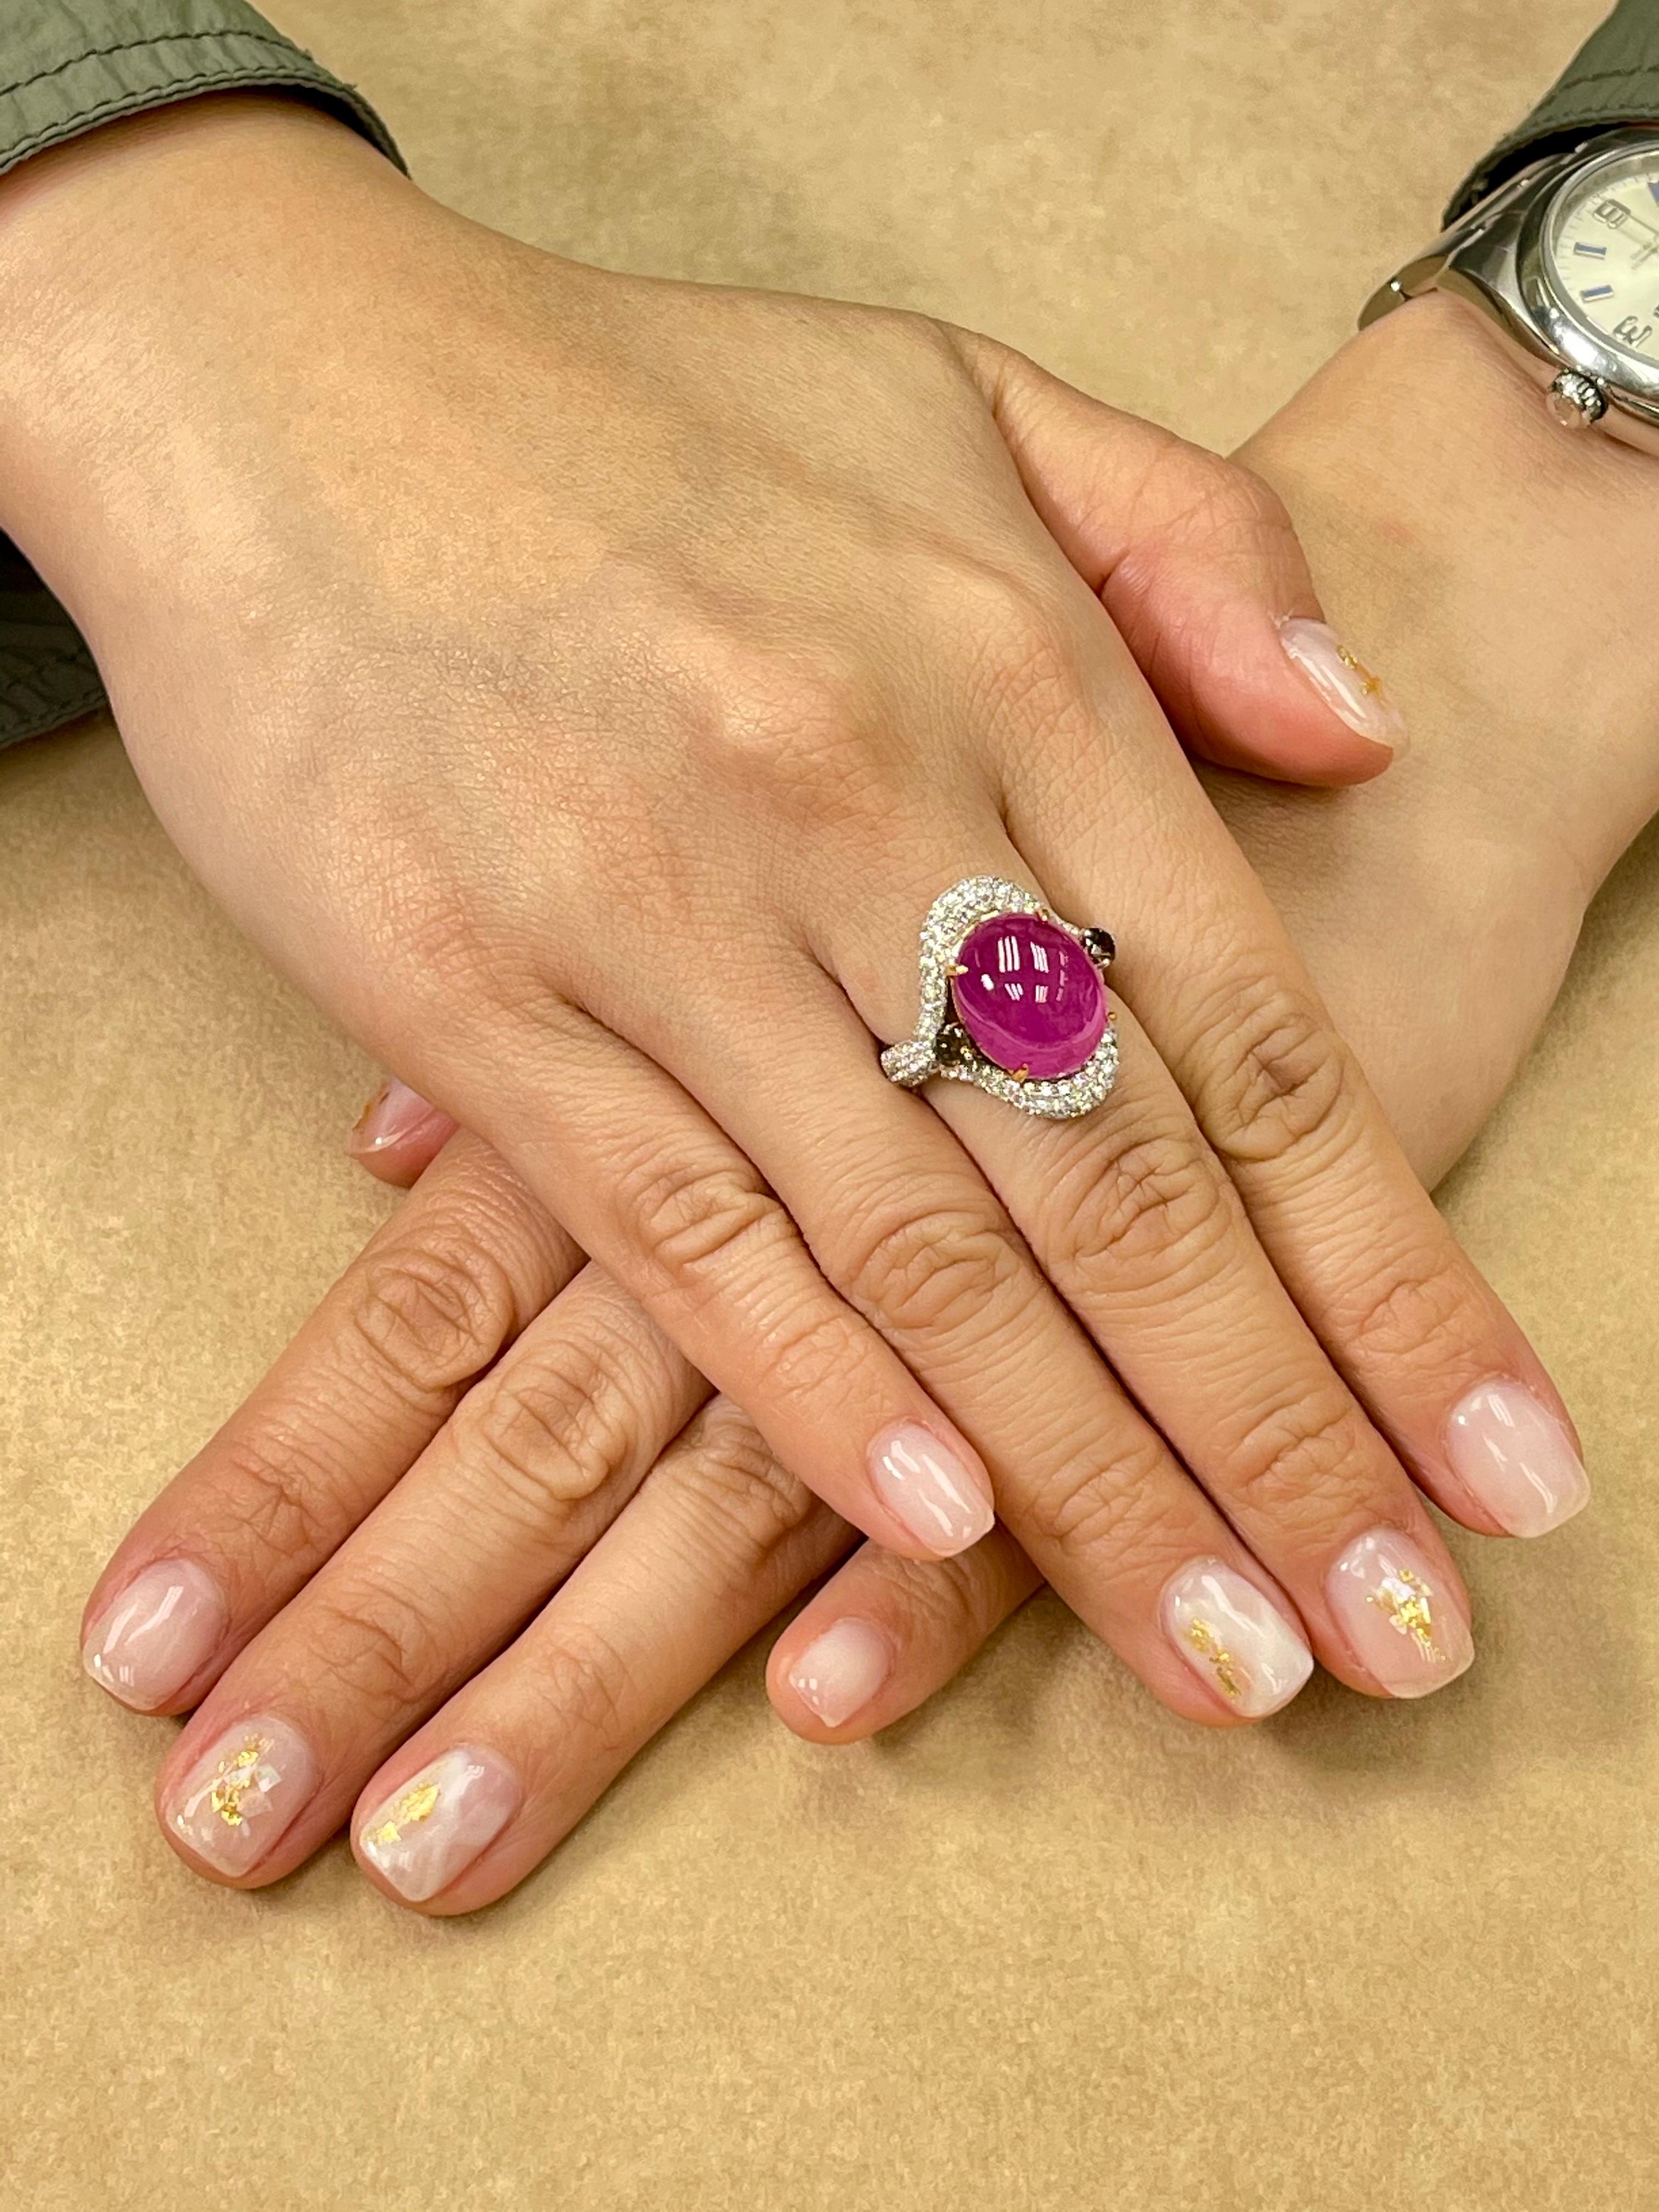 Please check out the HD video! Big statement piece. Here is a nice oversized pinkish red Ruby and diamond ring. The ring is set in 18k white gold and fancy cognac colored and white diamonds. The center pinkish red ruby cabochon is 9.08cts. There are